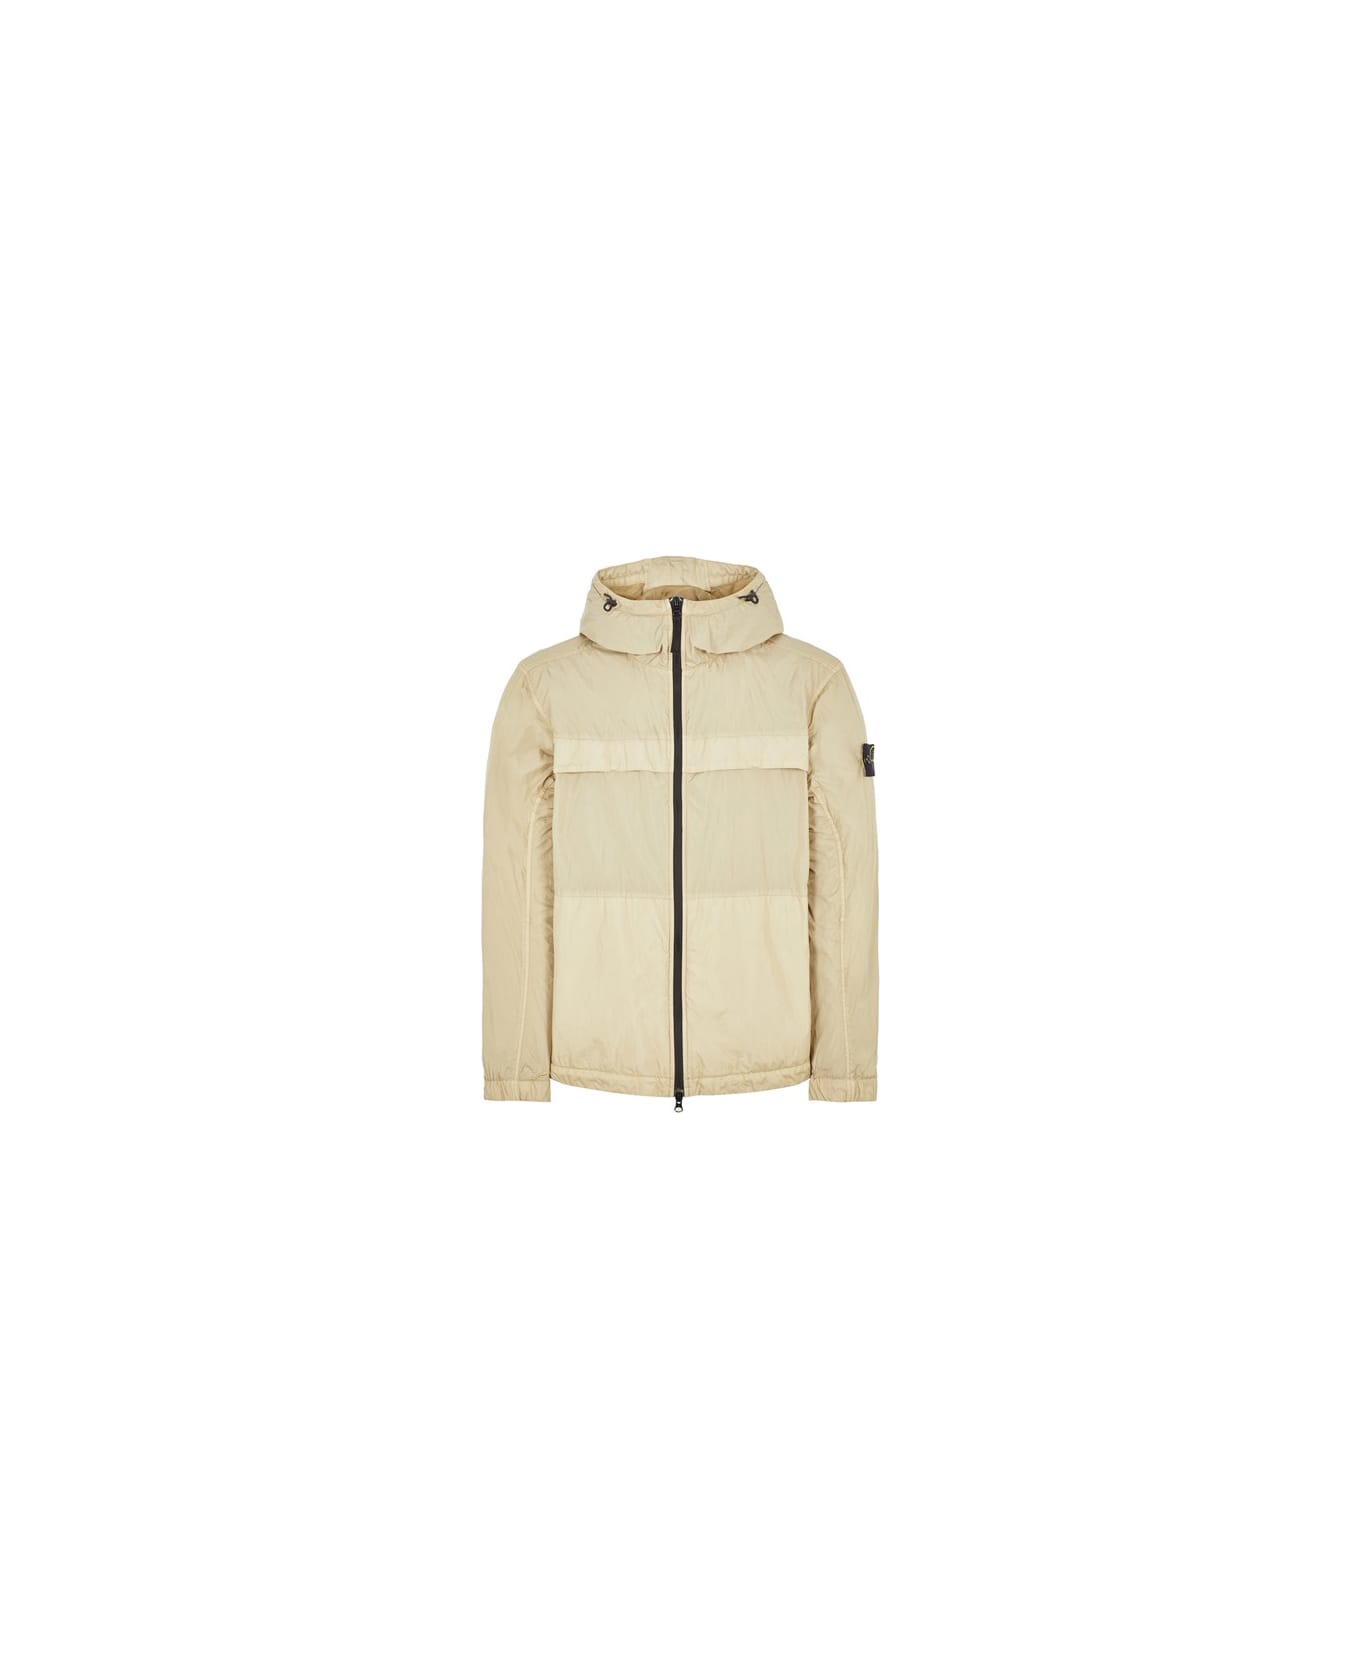 Stone Island Garment Dyed Crinkle Reps Jacket - Nude & Neutrals ダウンジャケット